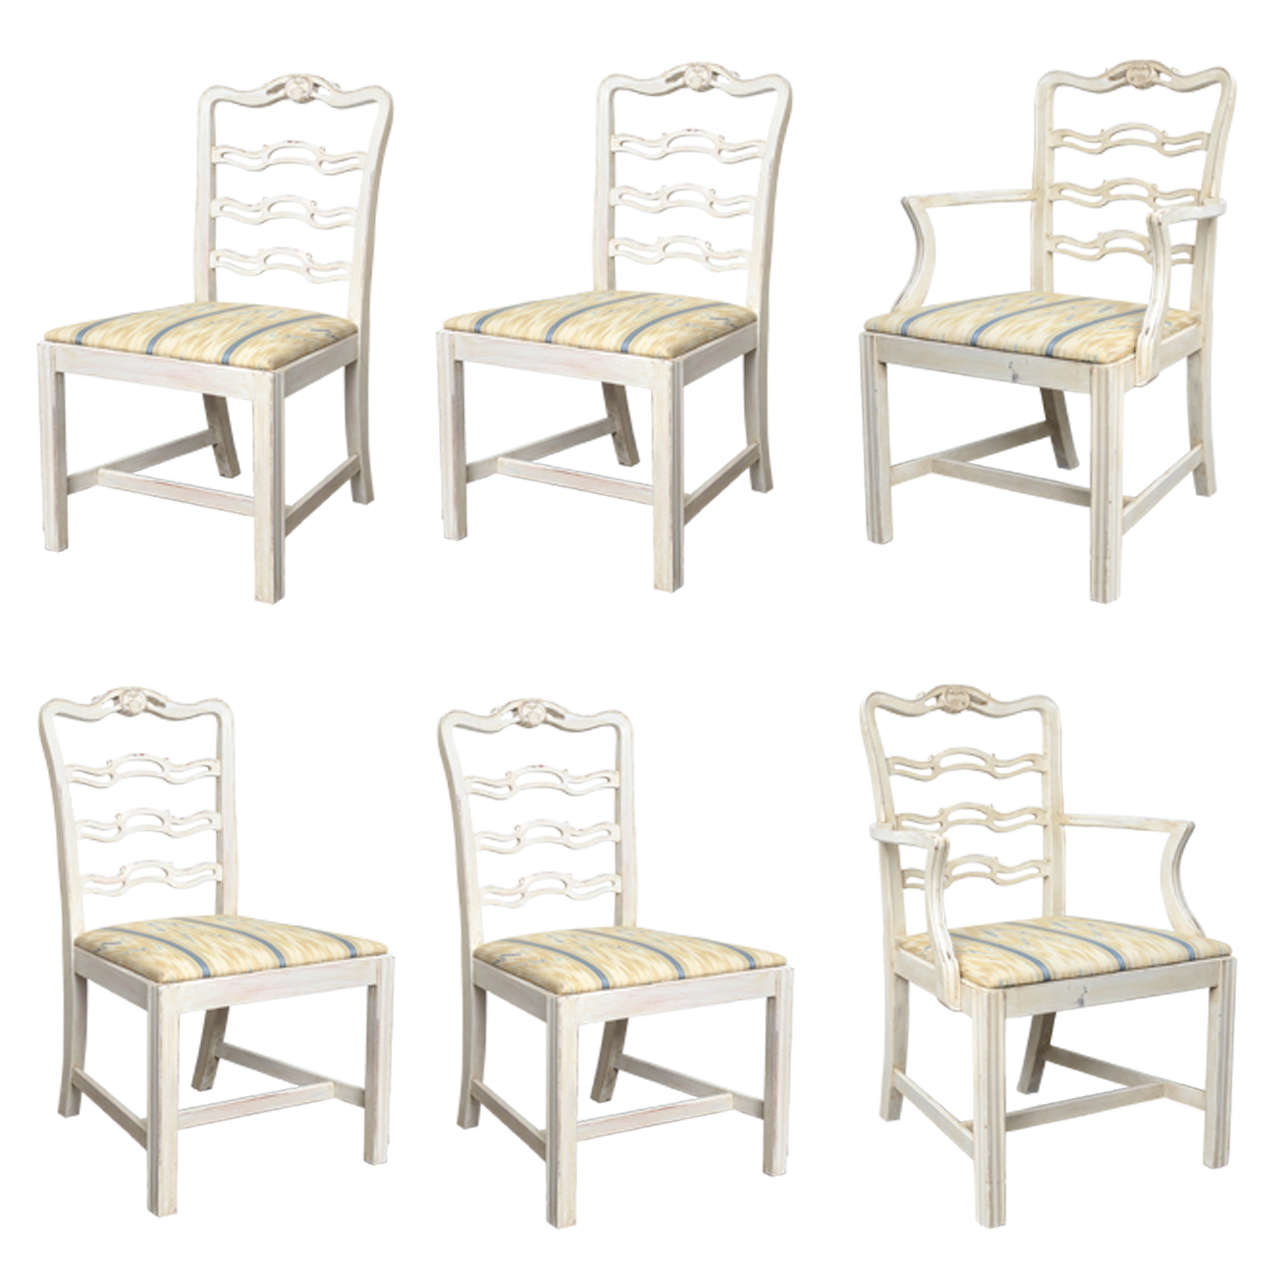 Ribbon Back Chairs - 12 For Sale on 1stDibs